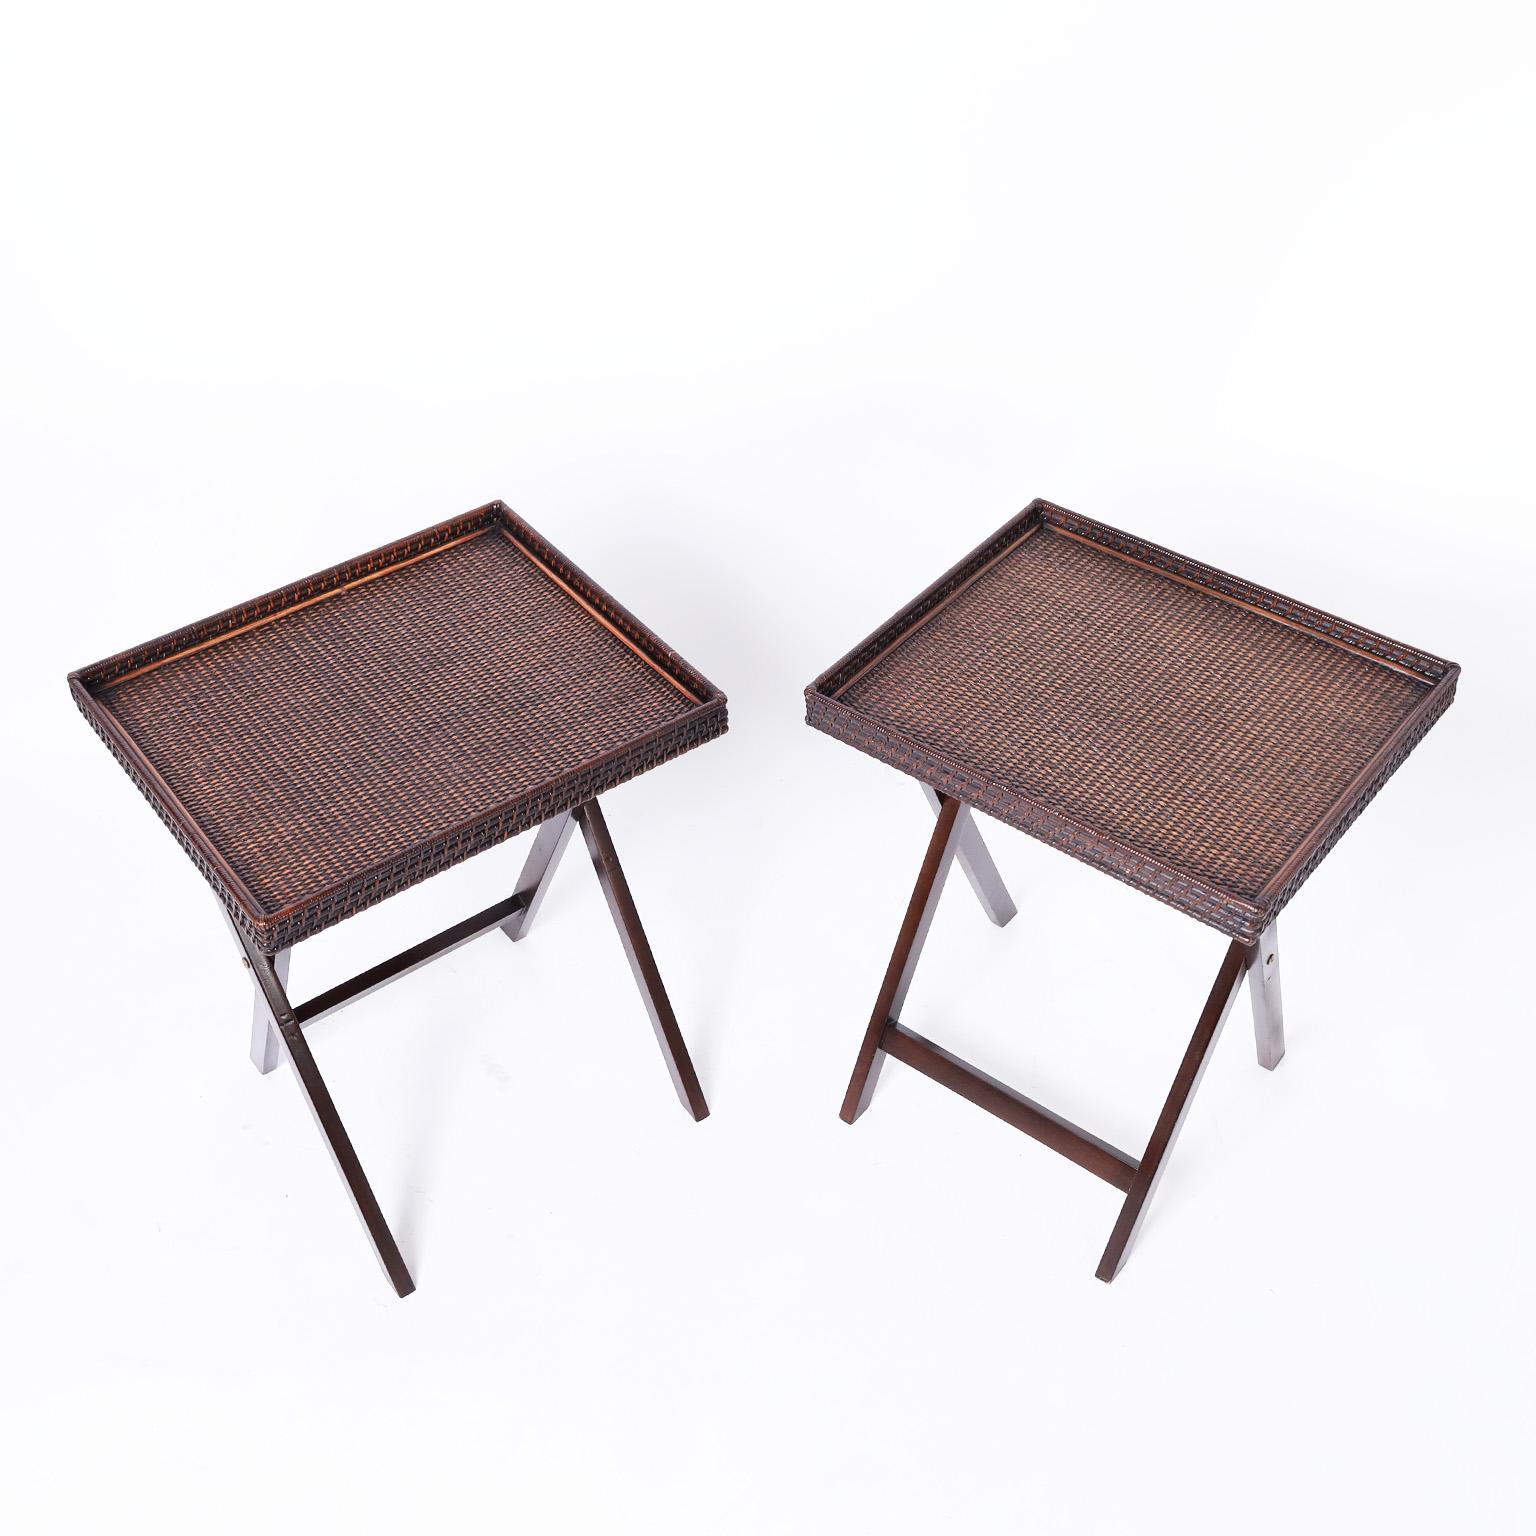 Vintage pair of folding tray or serving tables with woven rattan tops ambitiously crafted with galleries on folding X style bases.